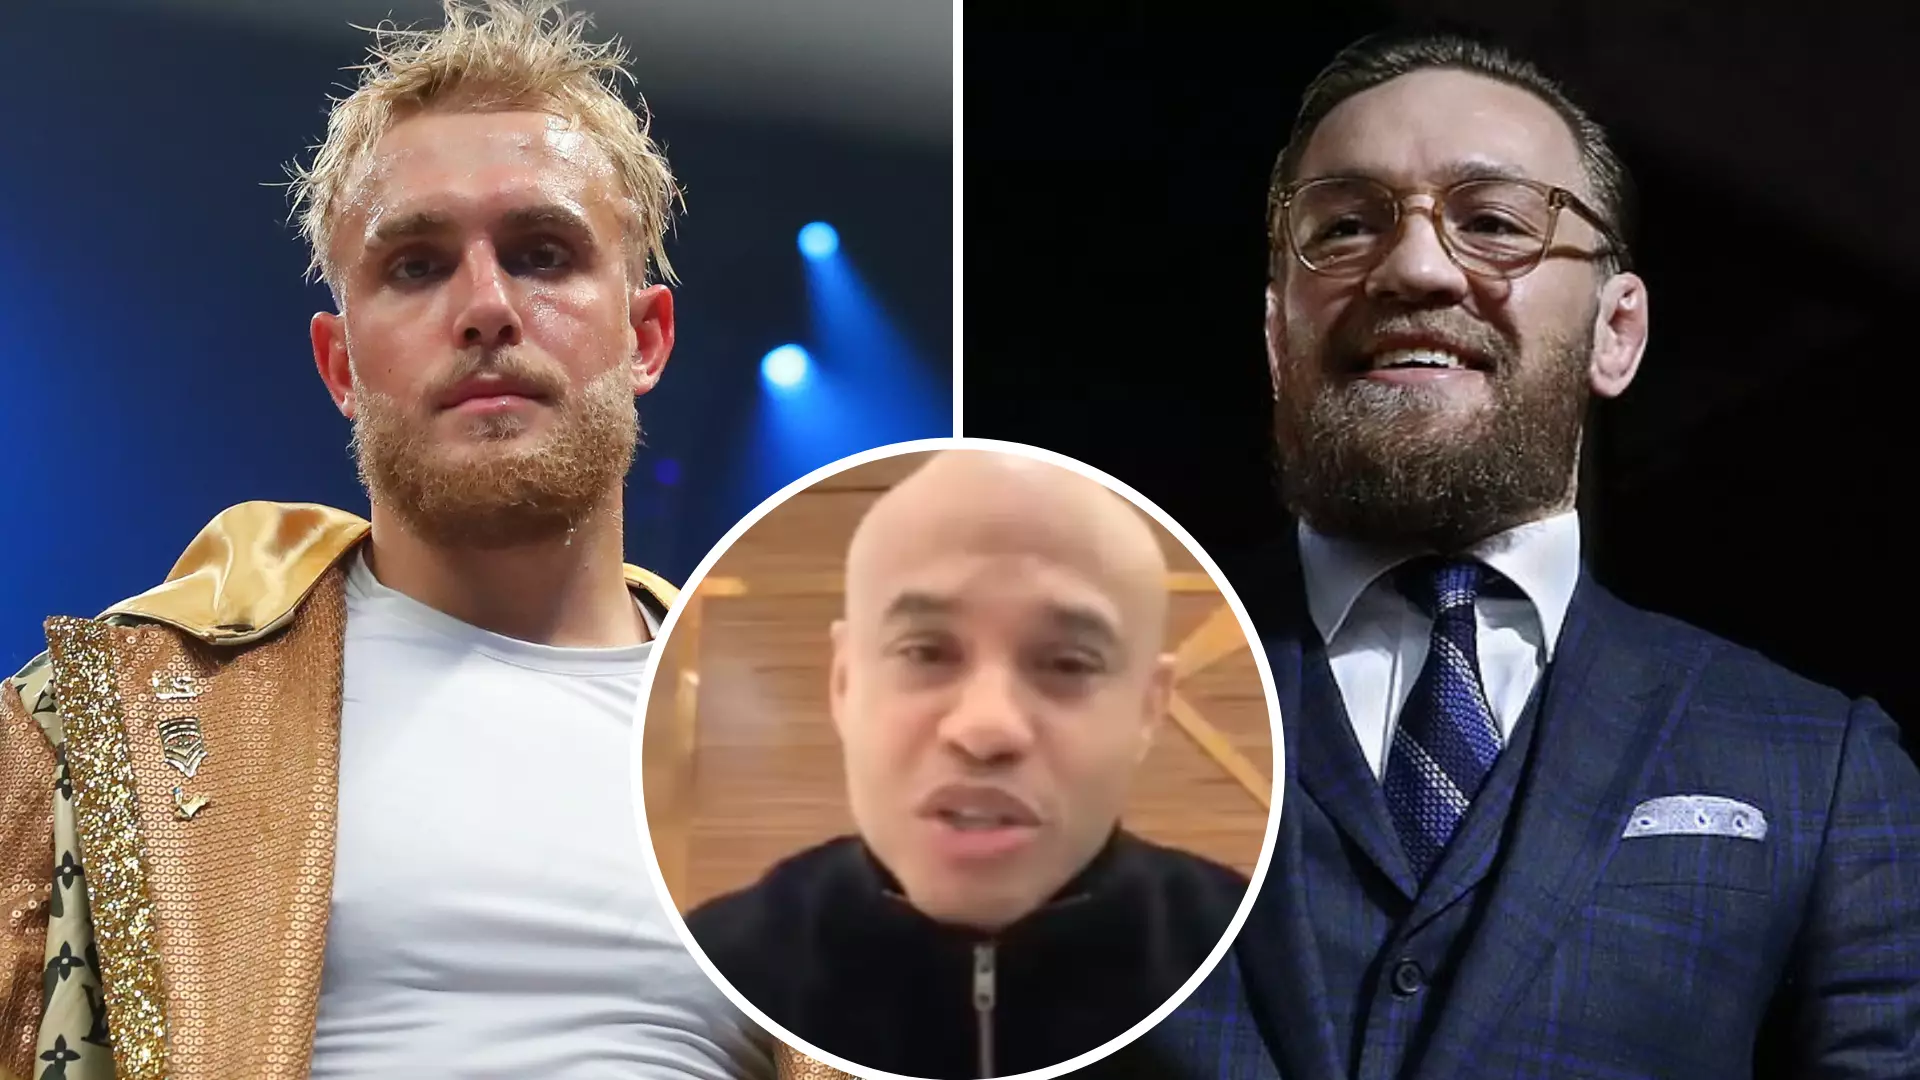 Ali Abdelaziz Claims That Jake Paul Would 'Beat The S**t Out' Of UFC Superstar Conor McGregor